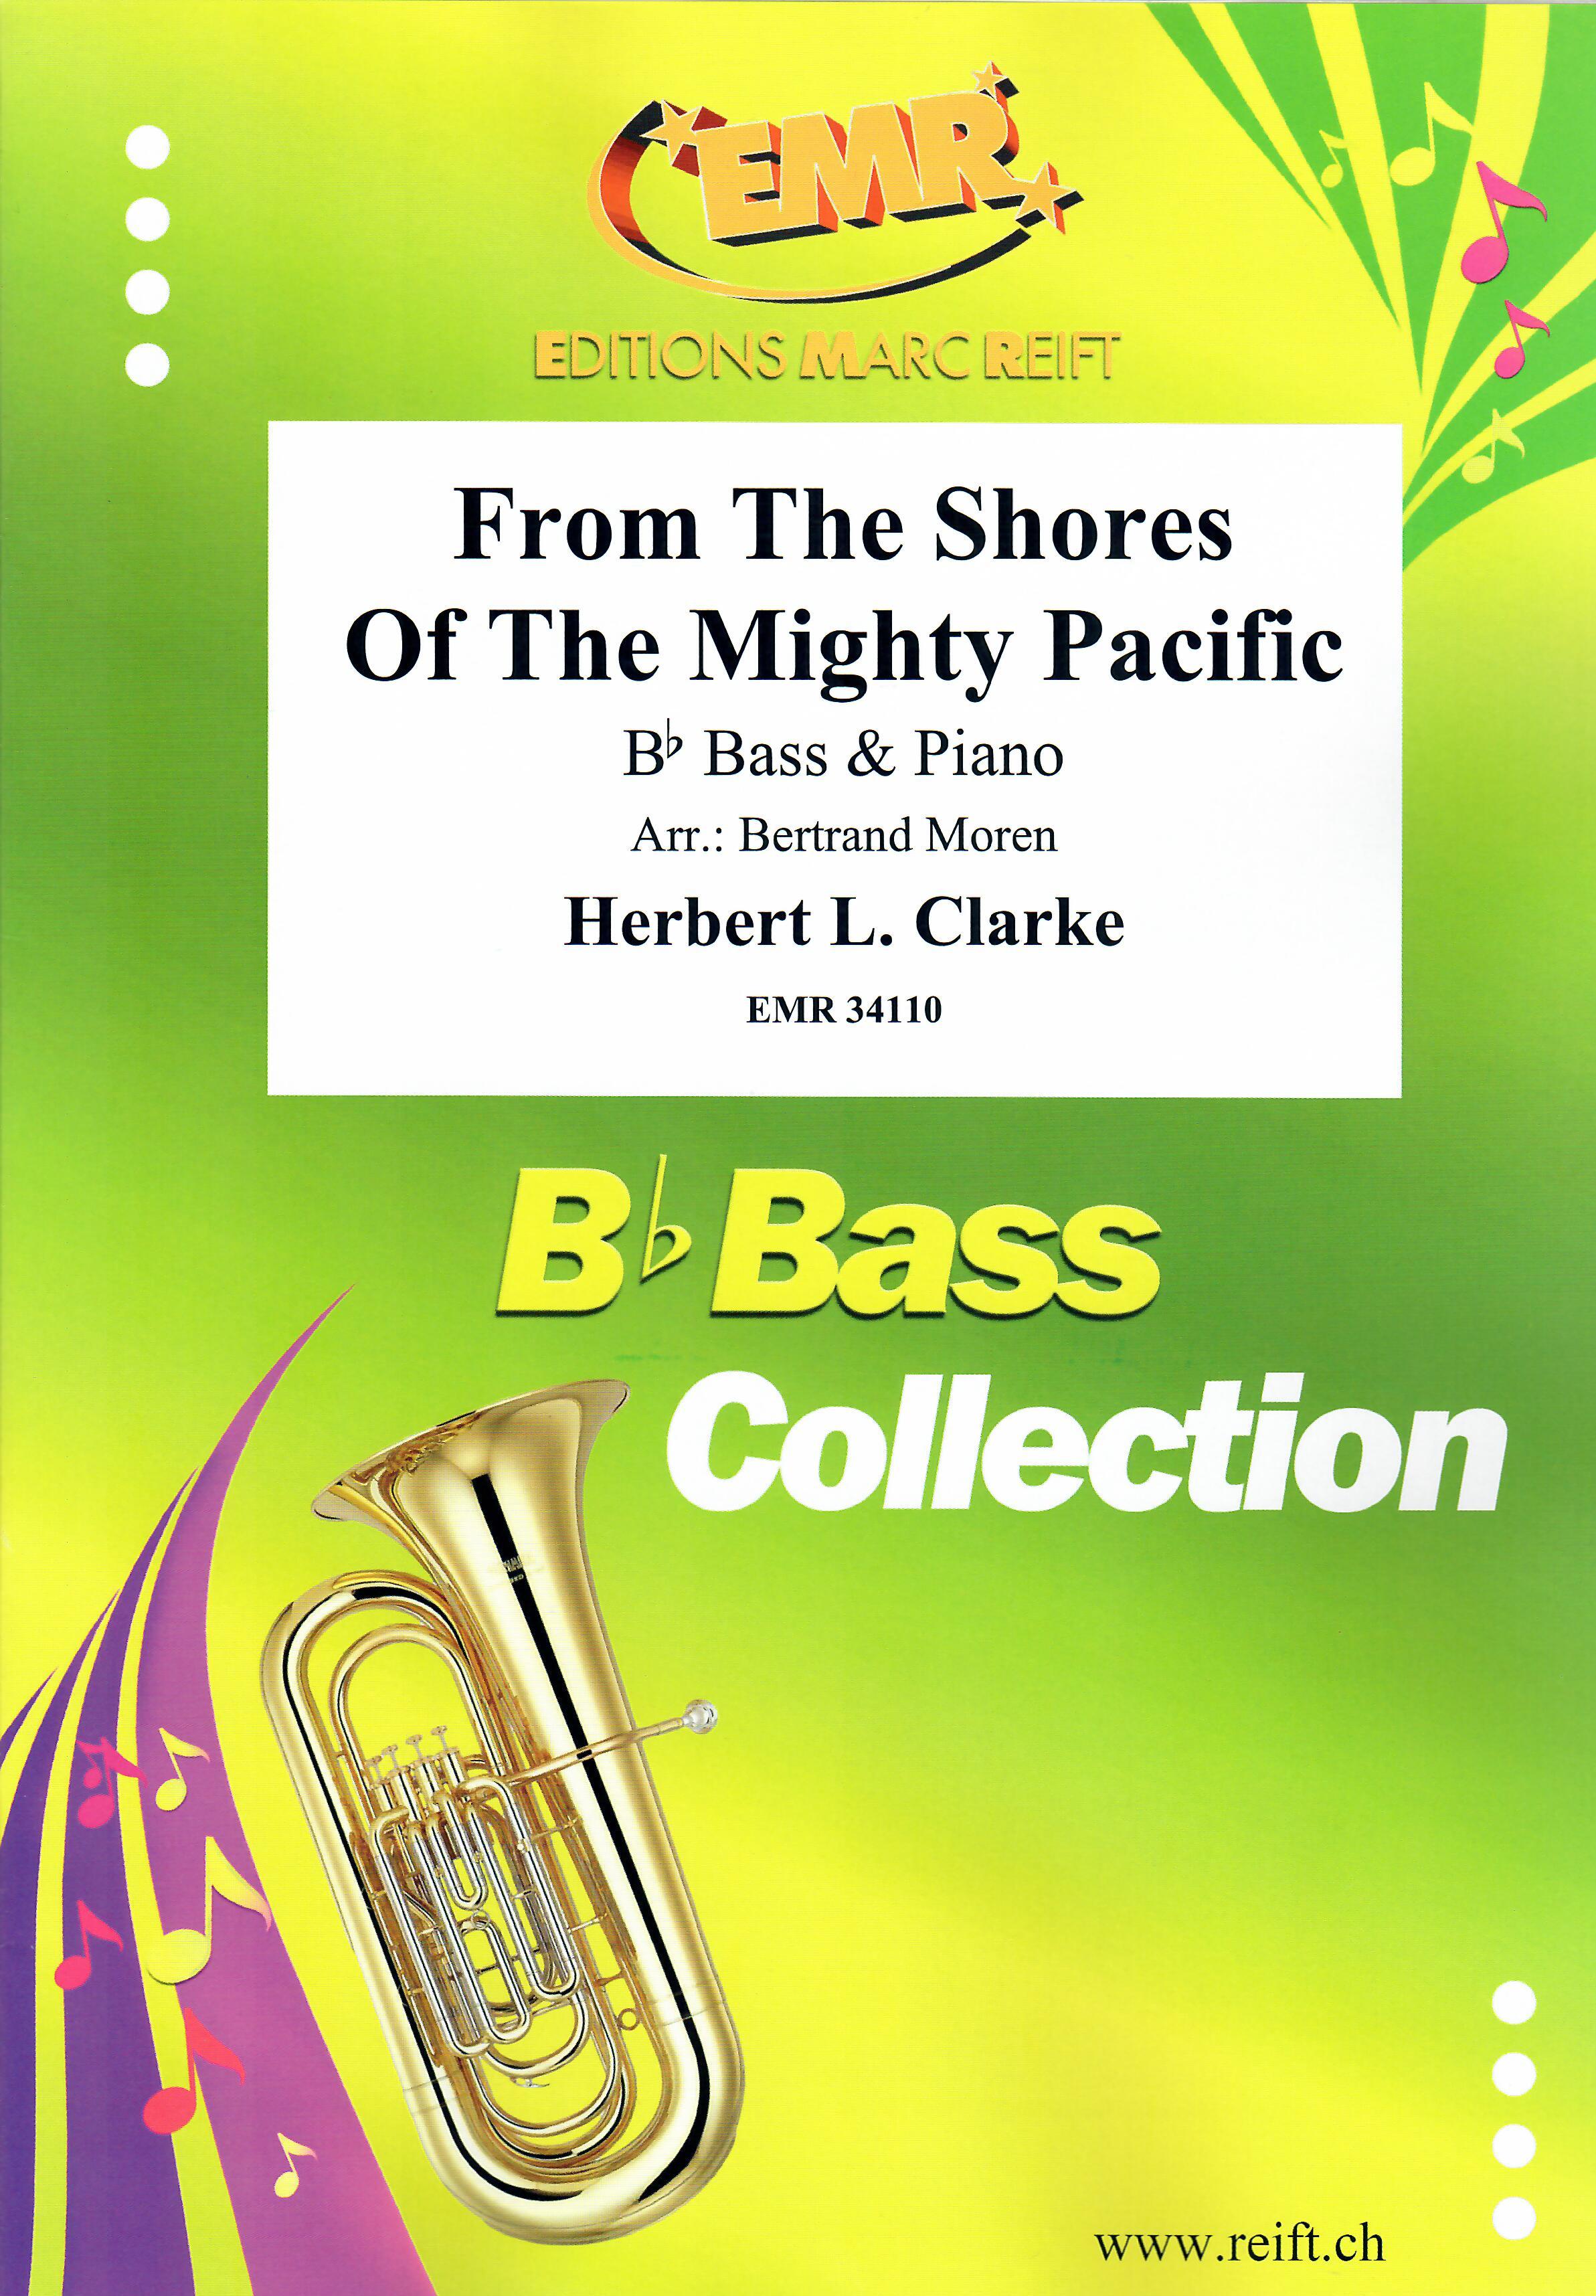 FROM THE SHORES OF THE MIGHTY PACIFIC, SOLOS - E♭. Bass